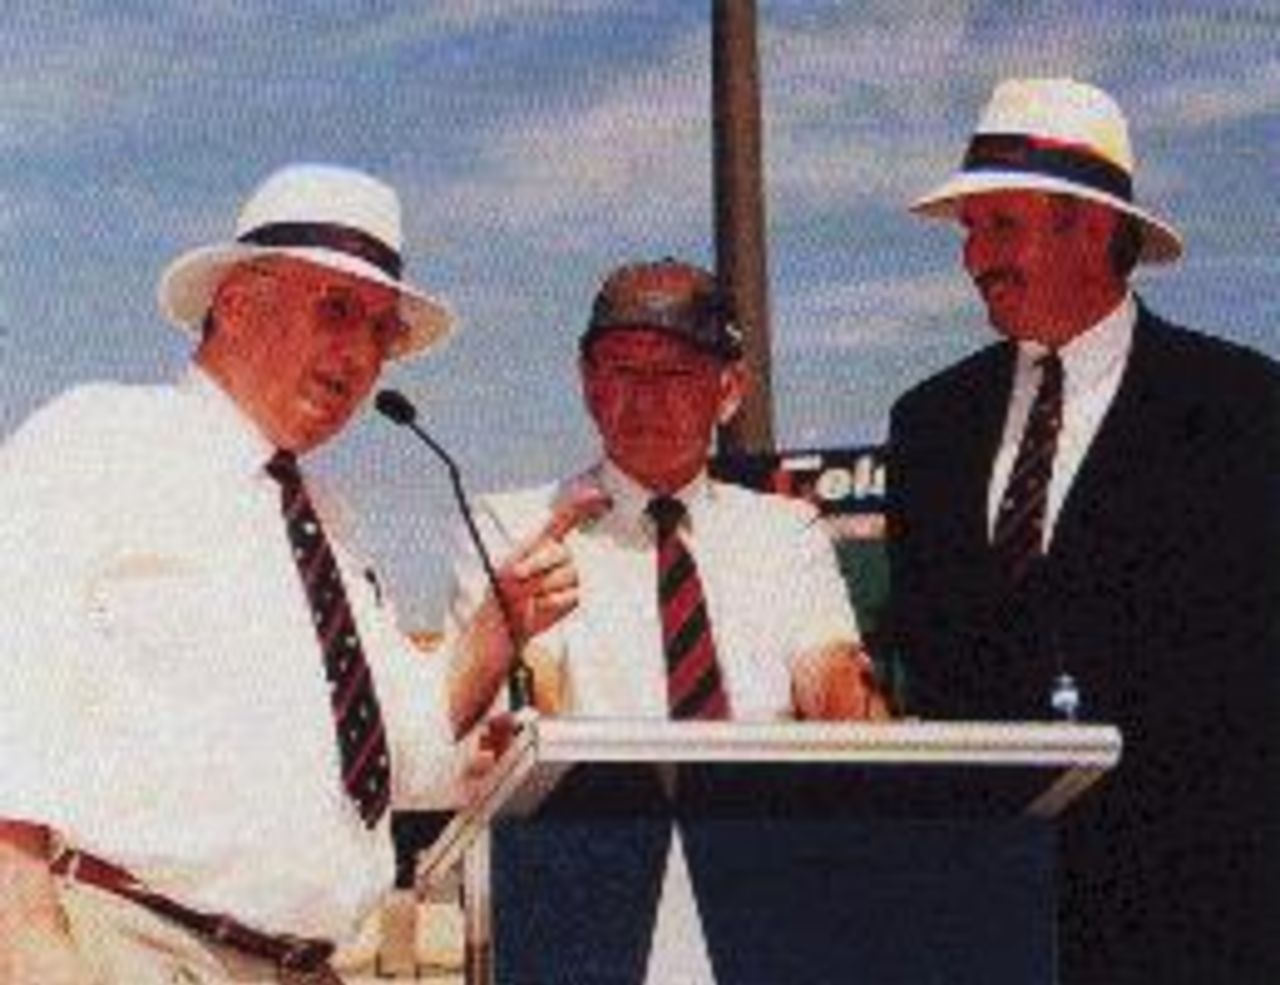 Nugget, Dougie and maxie on the podium at an SCG Doug Walters Club lunch